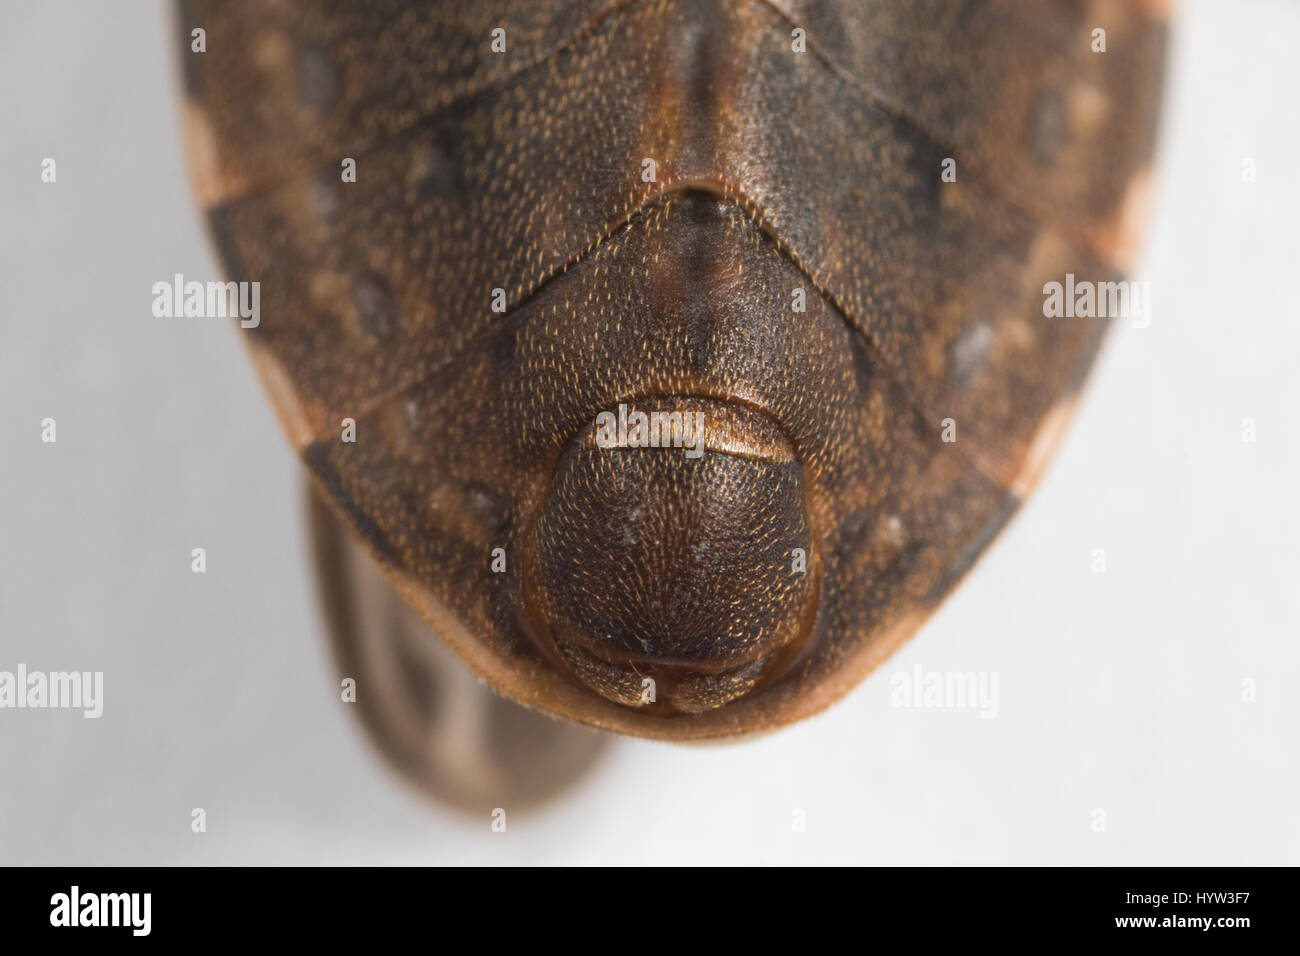 close up of the ventral tip of the abdomen of Rhodnius prolixus (kissing bug) Stock Photo